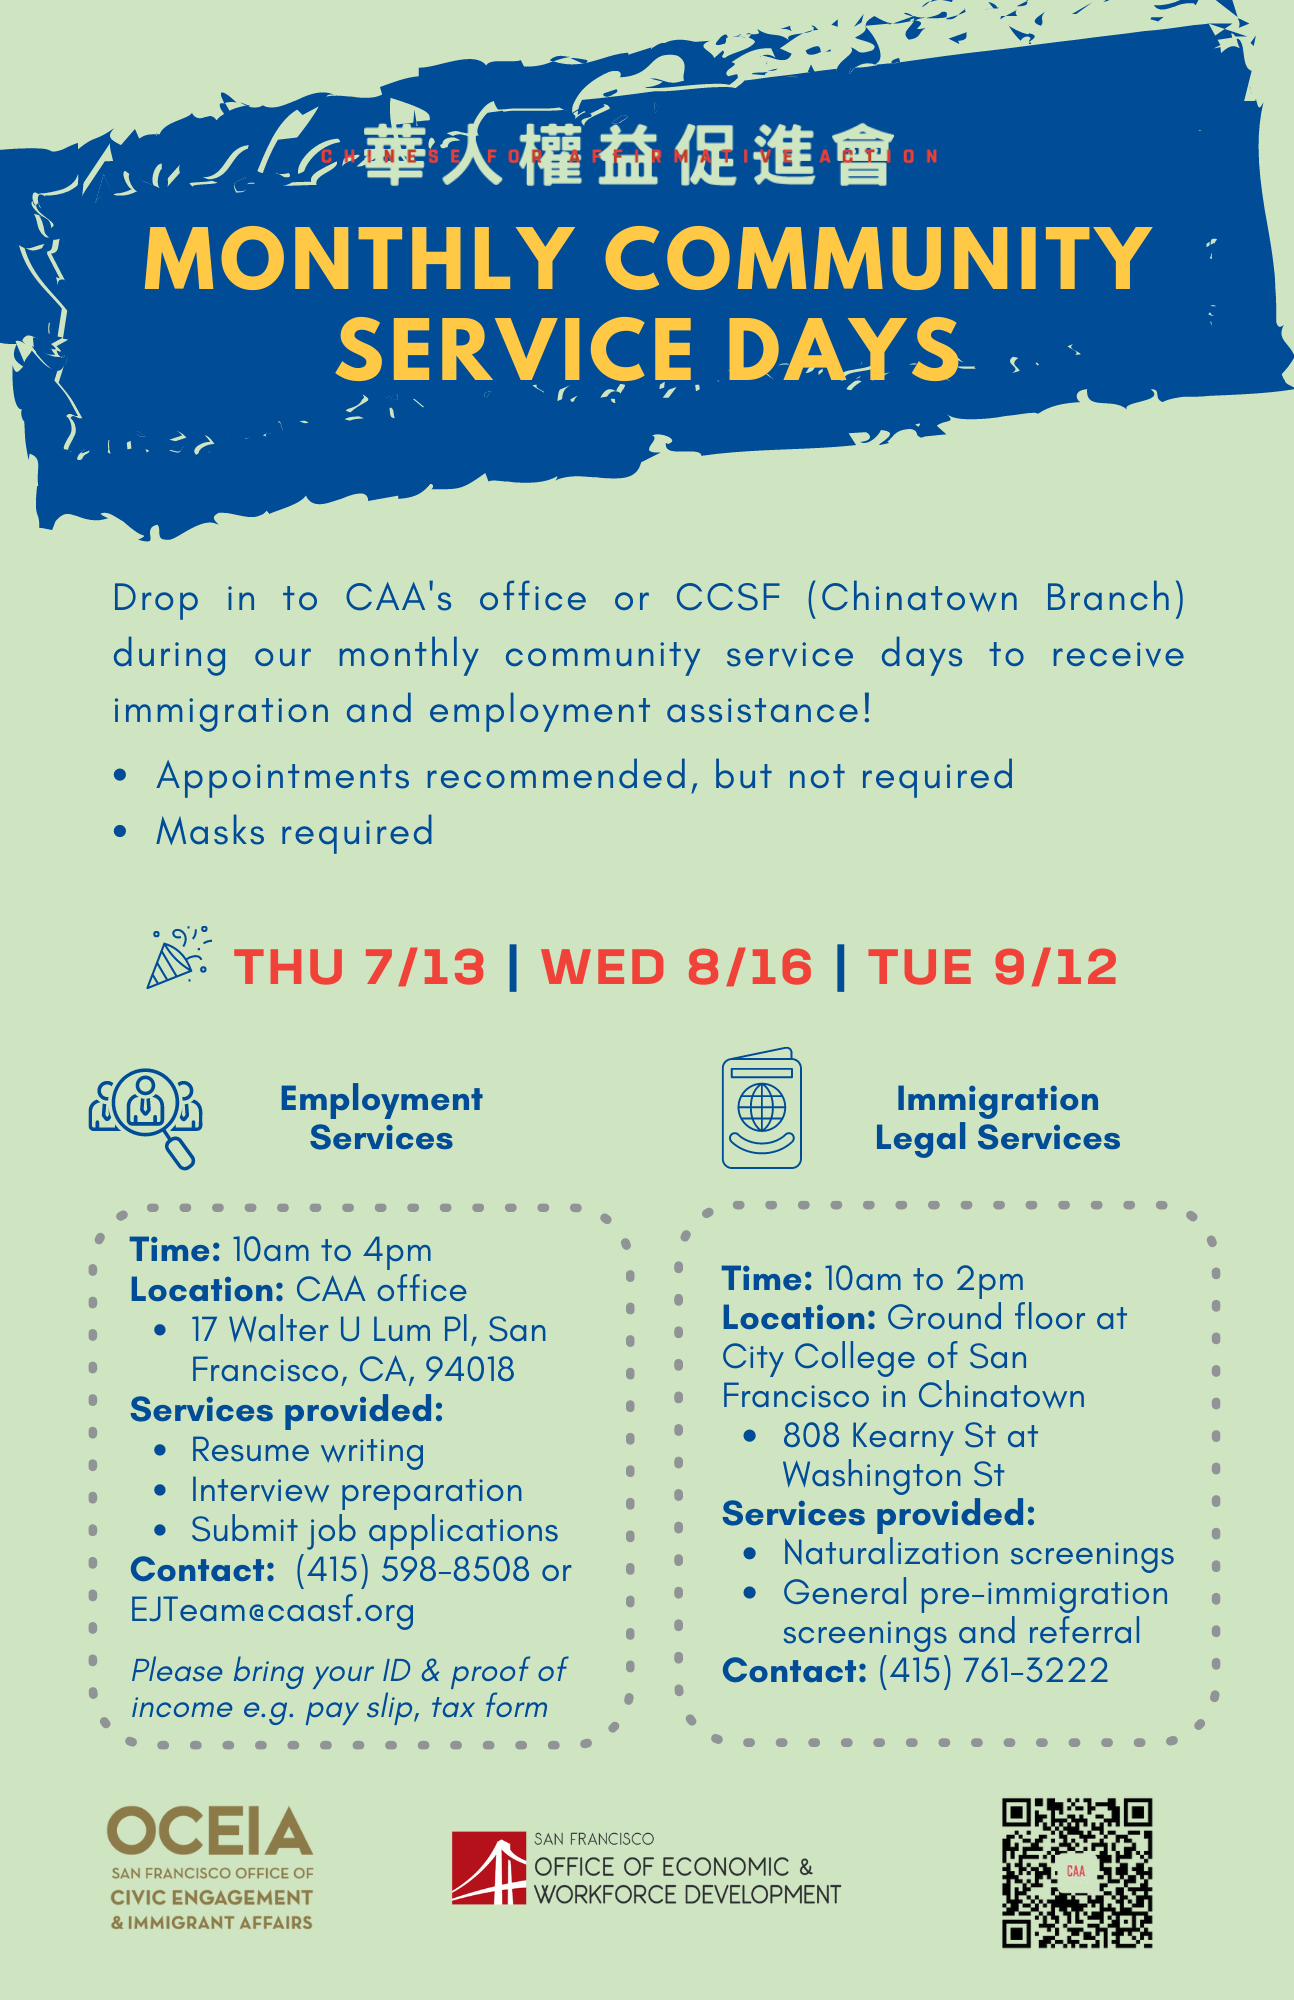 A jade and blue flyer announcing upcoming community service days at CAA and CCSF Chinatown campus.